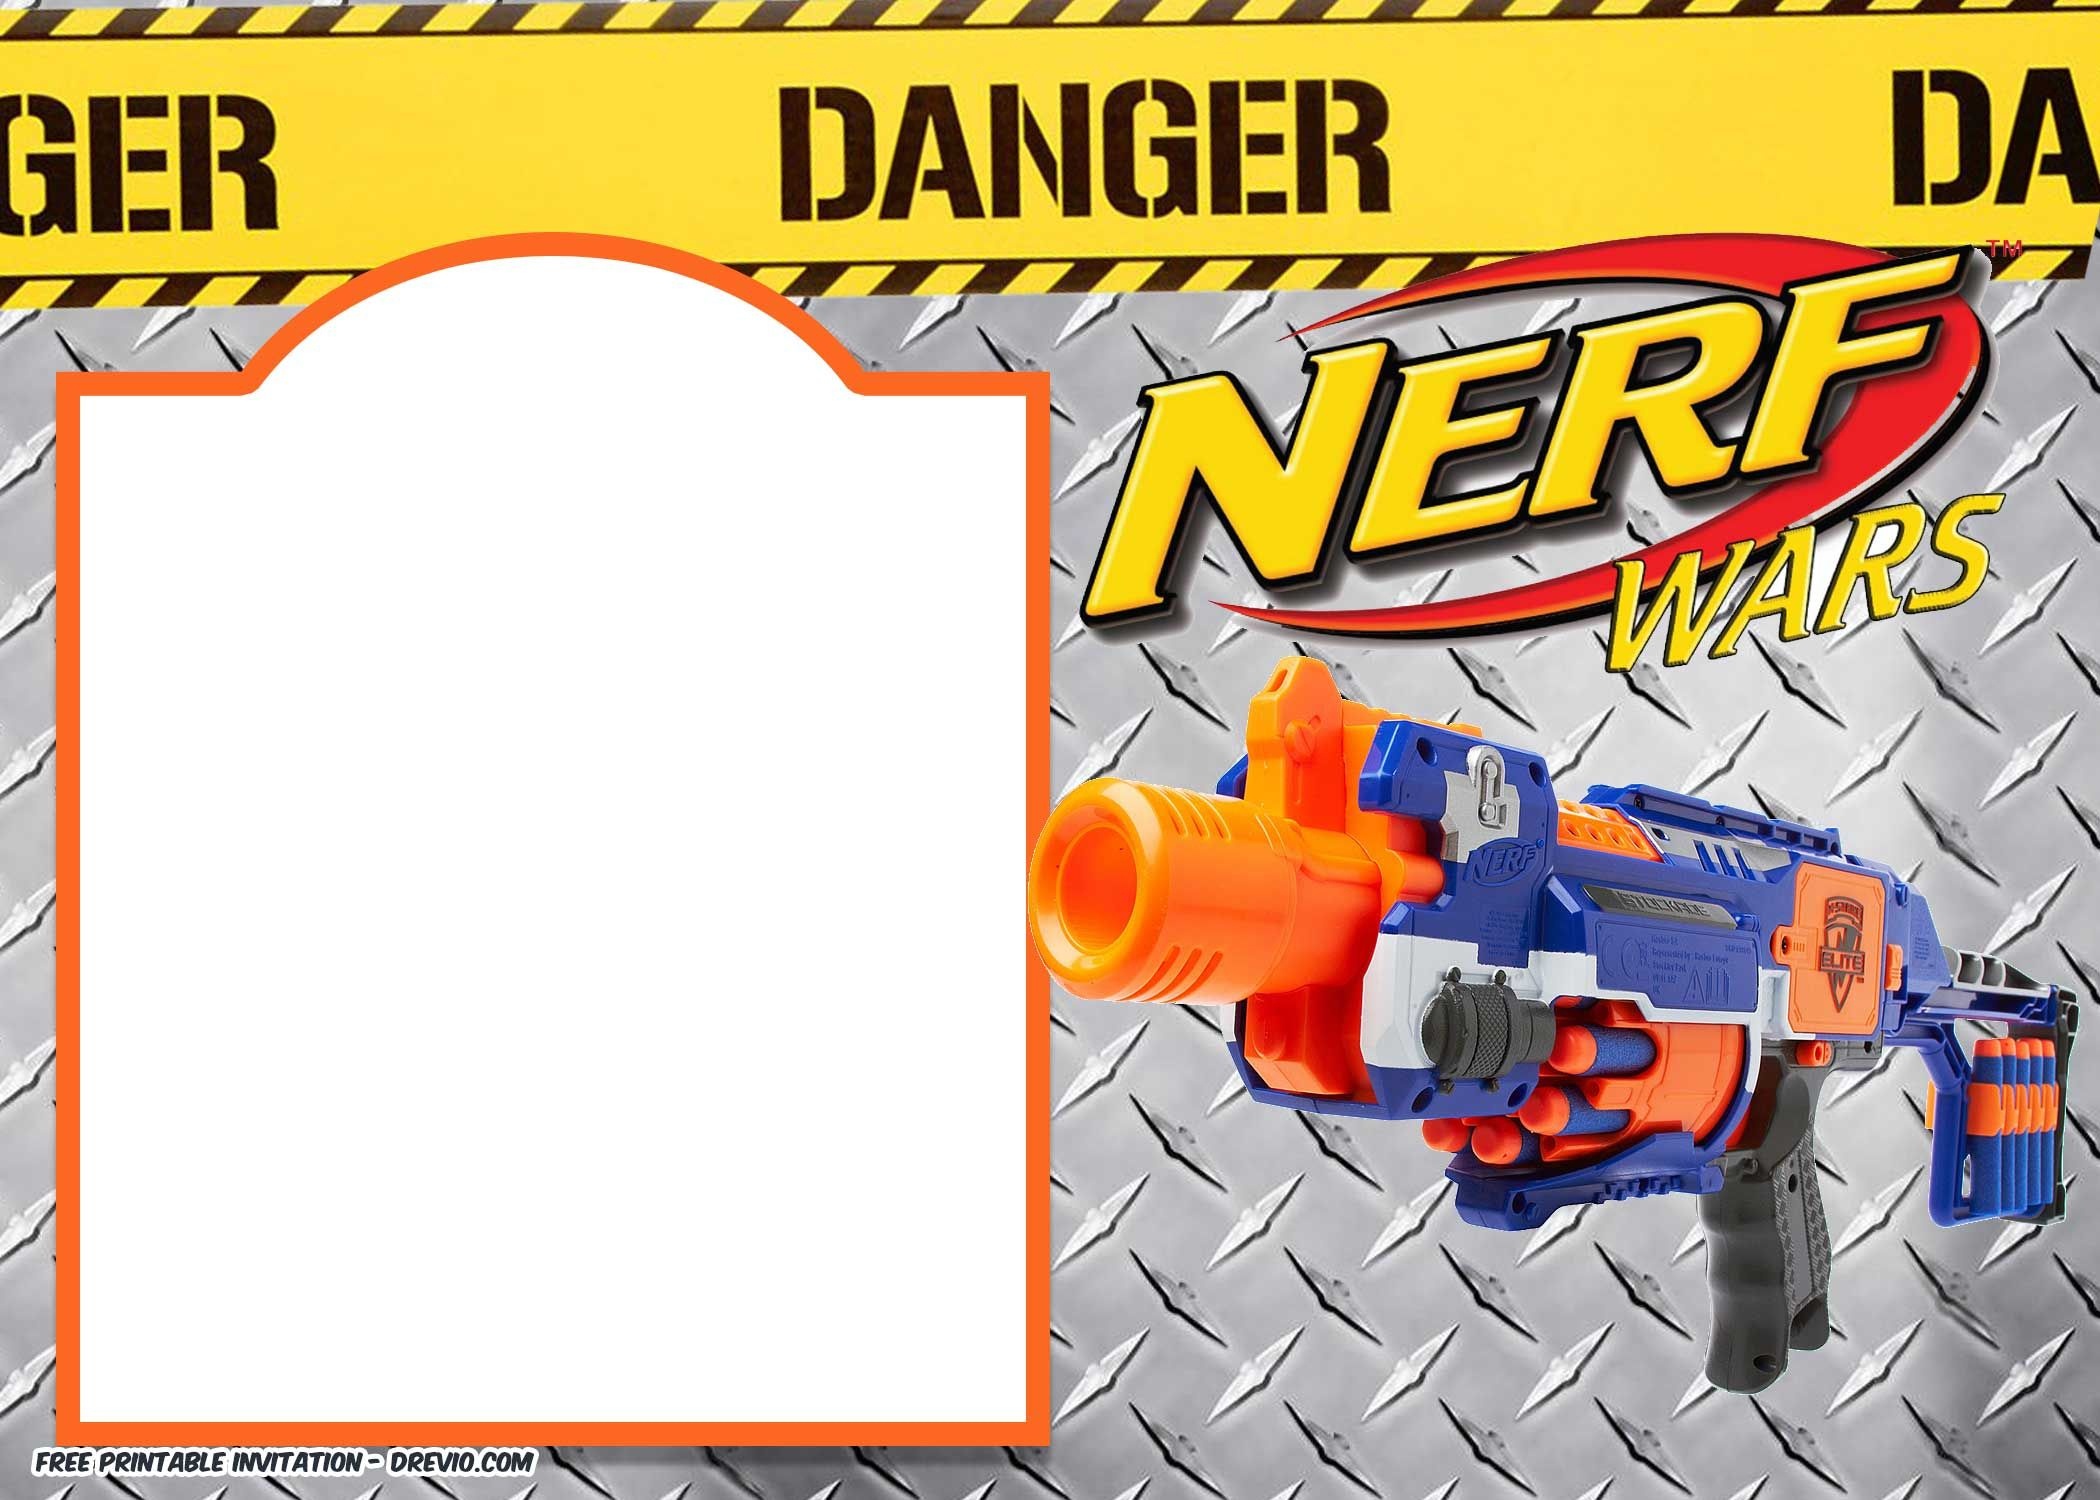 Download File:nerf Logo.svg - Wikimedia Commons | Cakes | Nerf ...